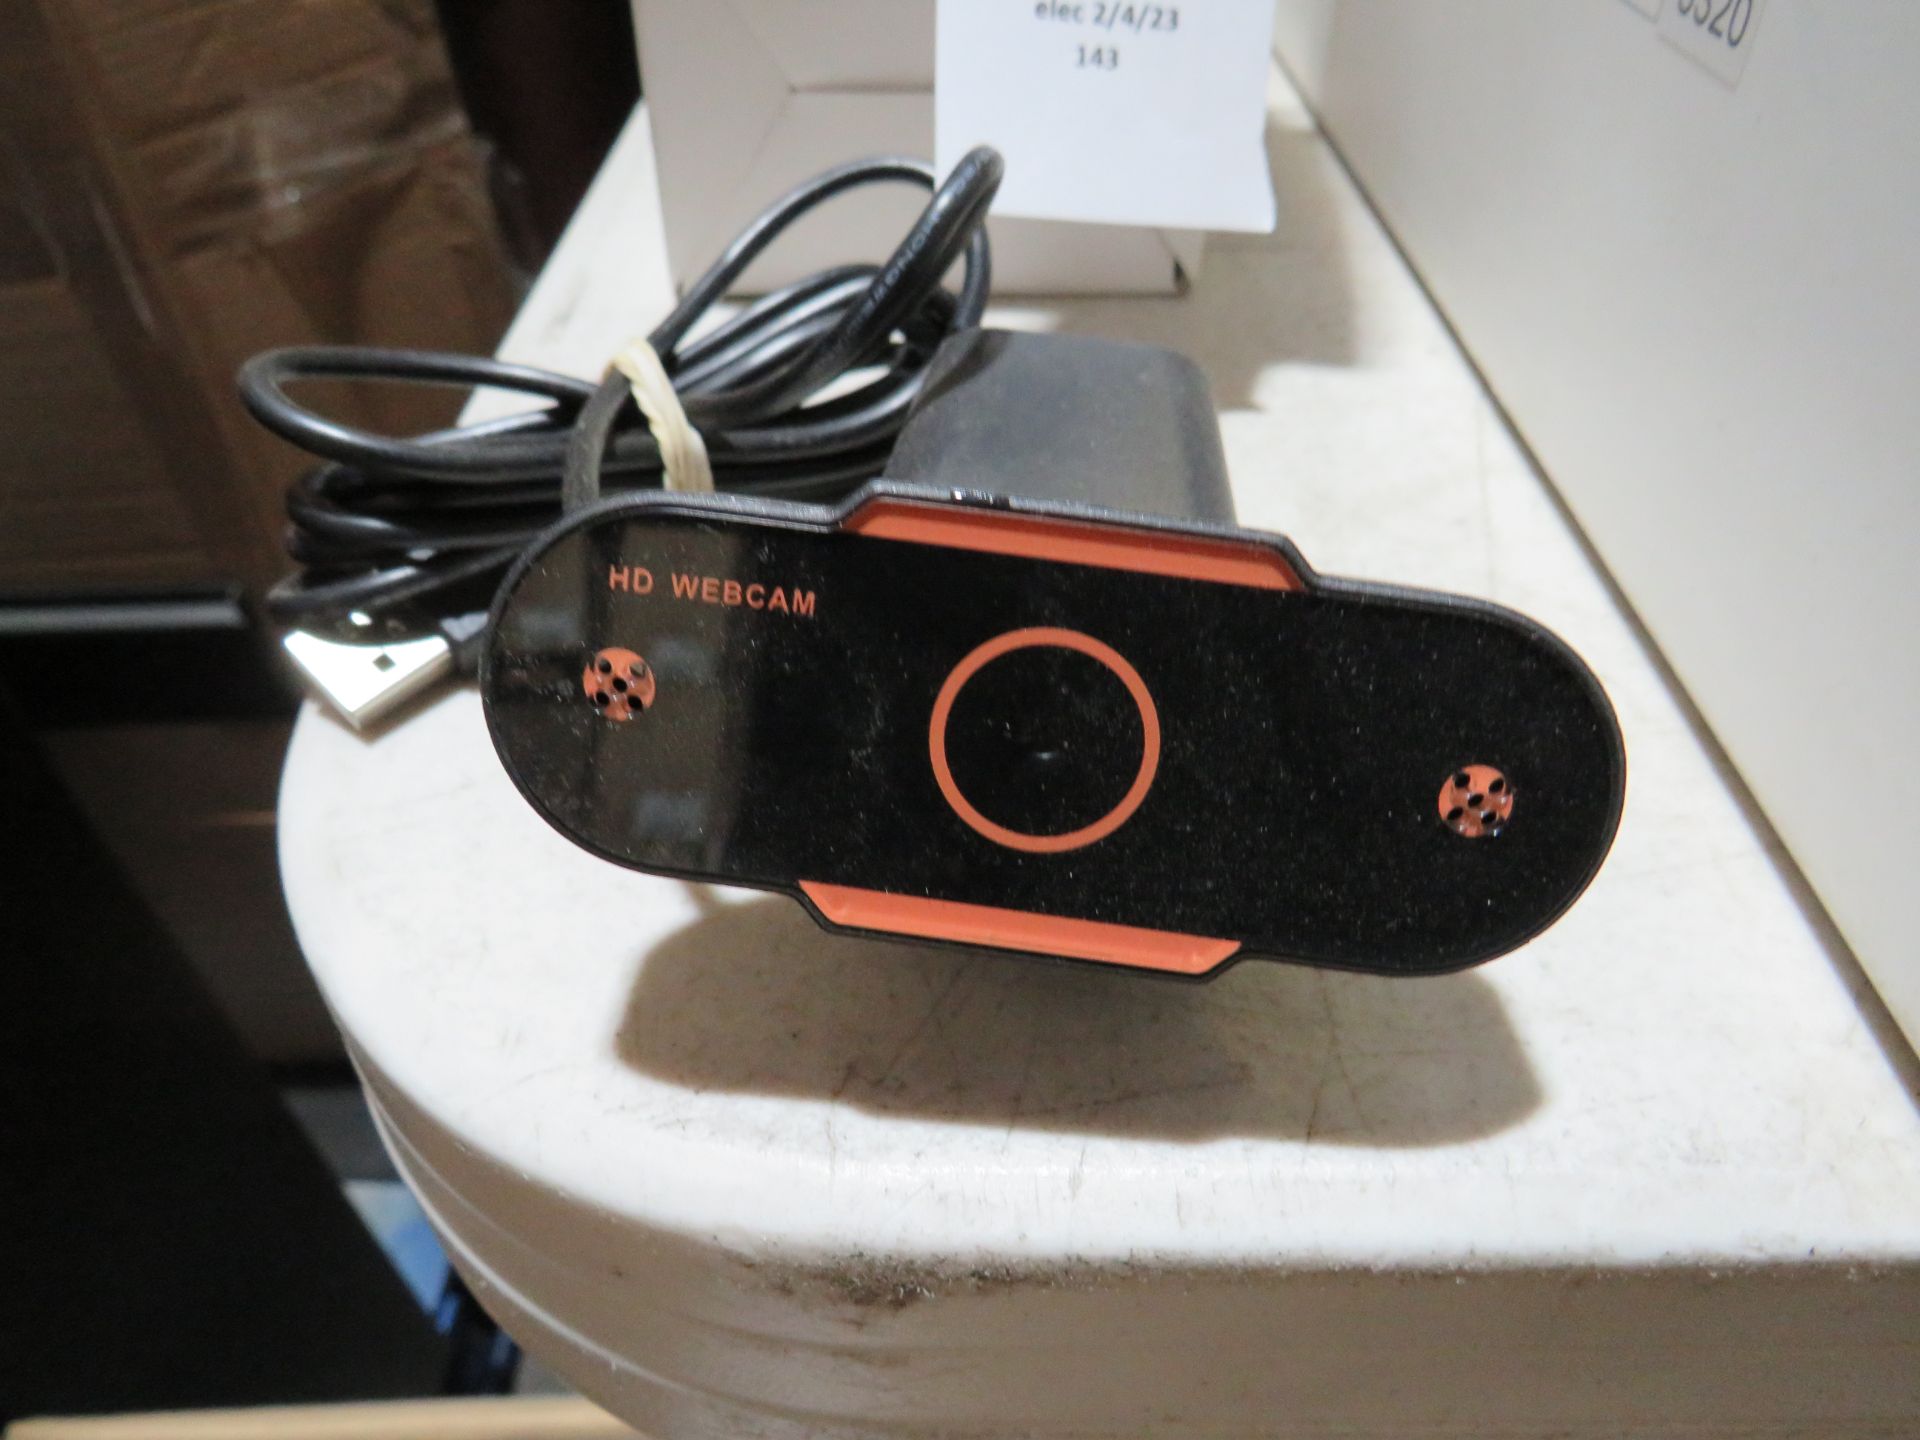 HD webcam new and boxed